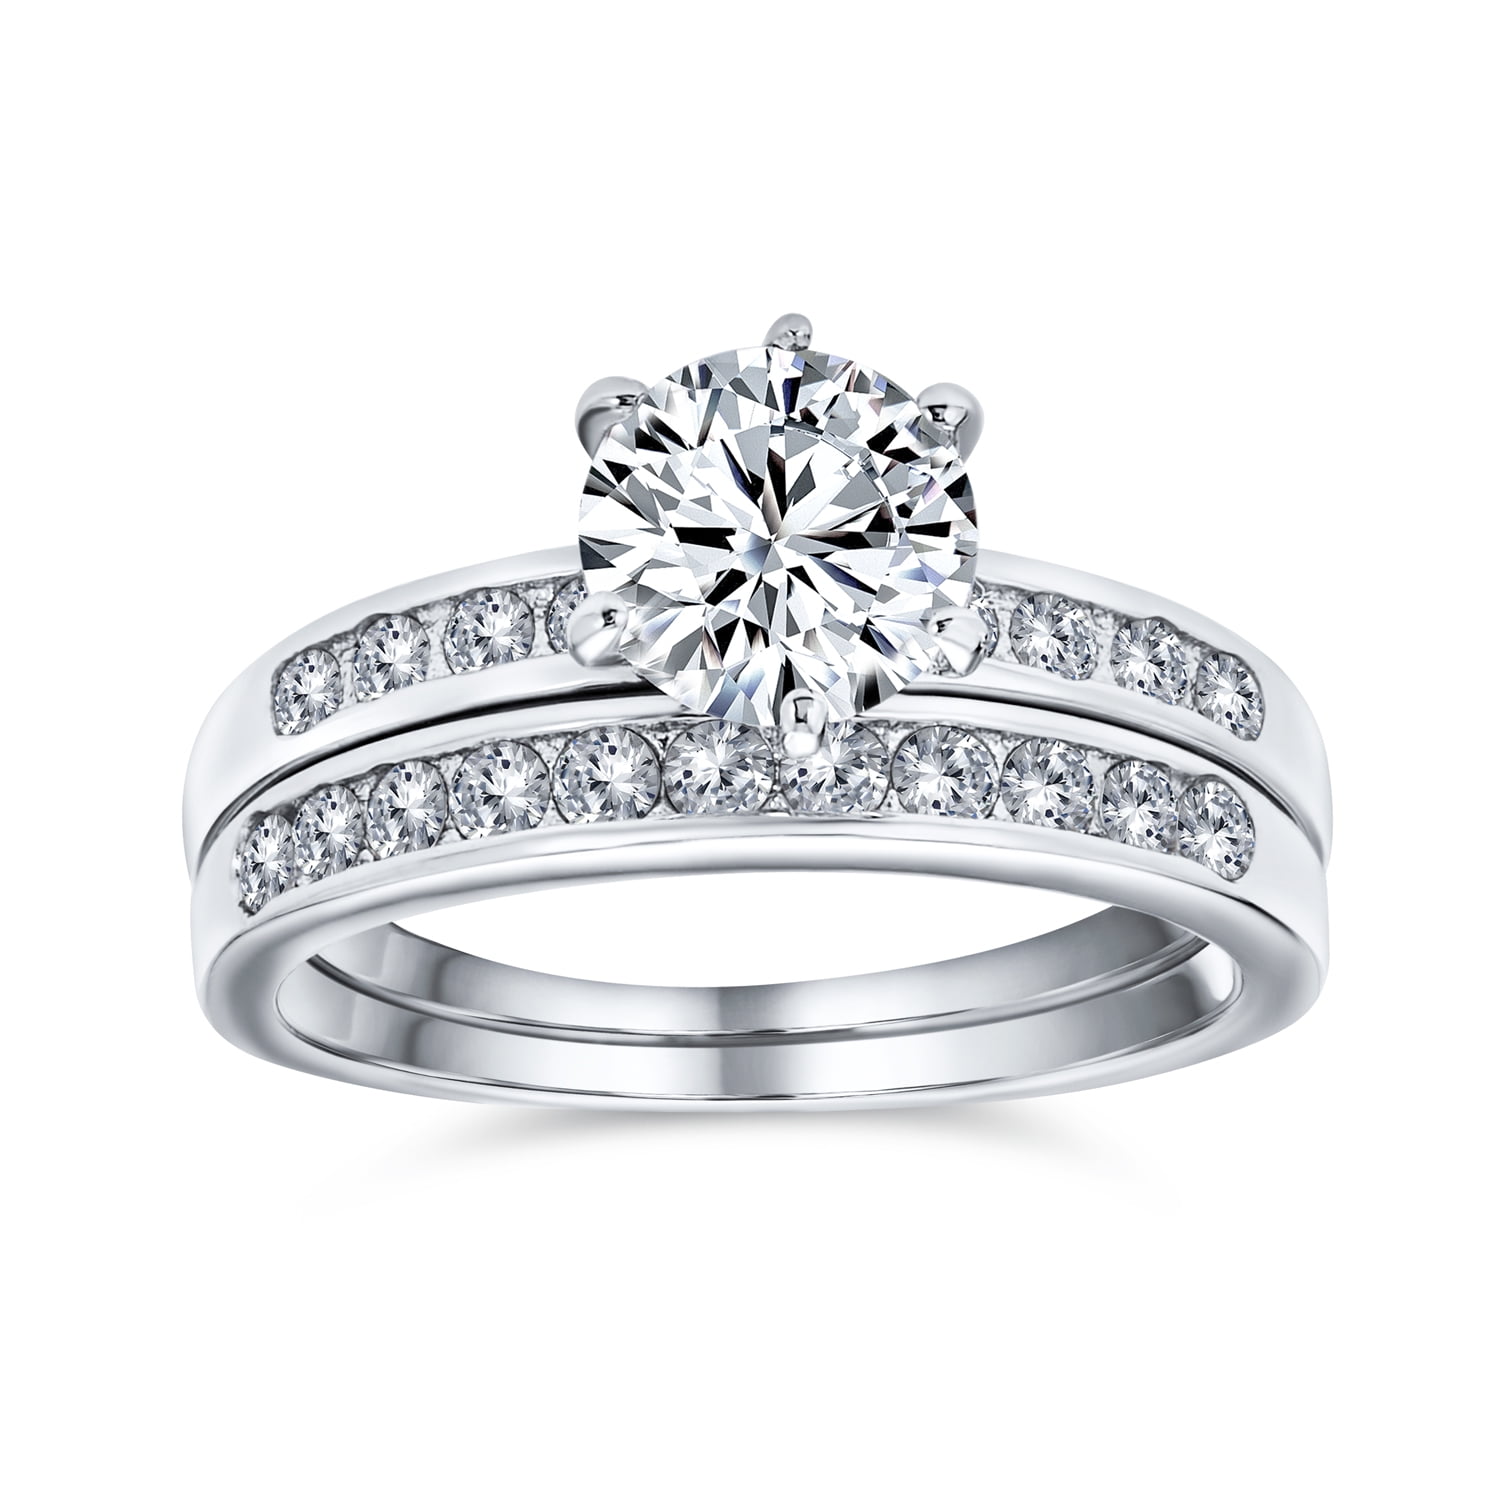 3.7 TCW Classic Round Solitaire CZ Bridal Engagement Wedding Ring Set Size 6 